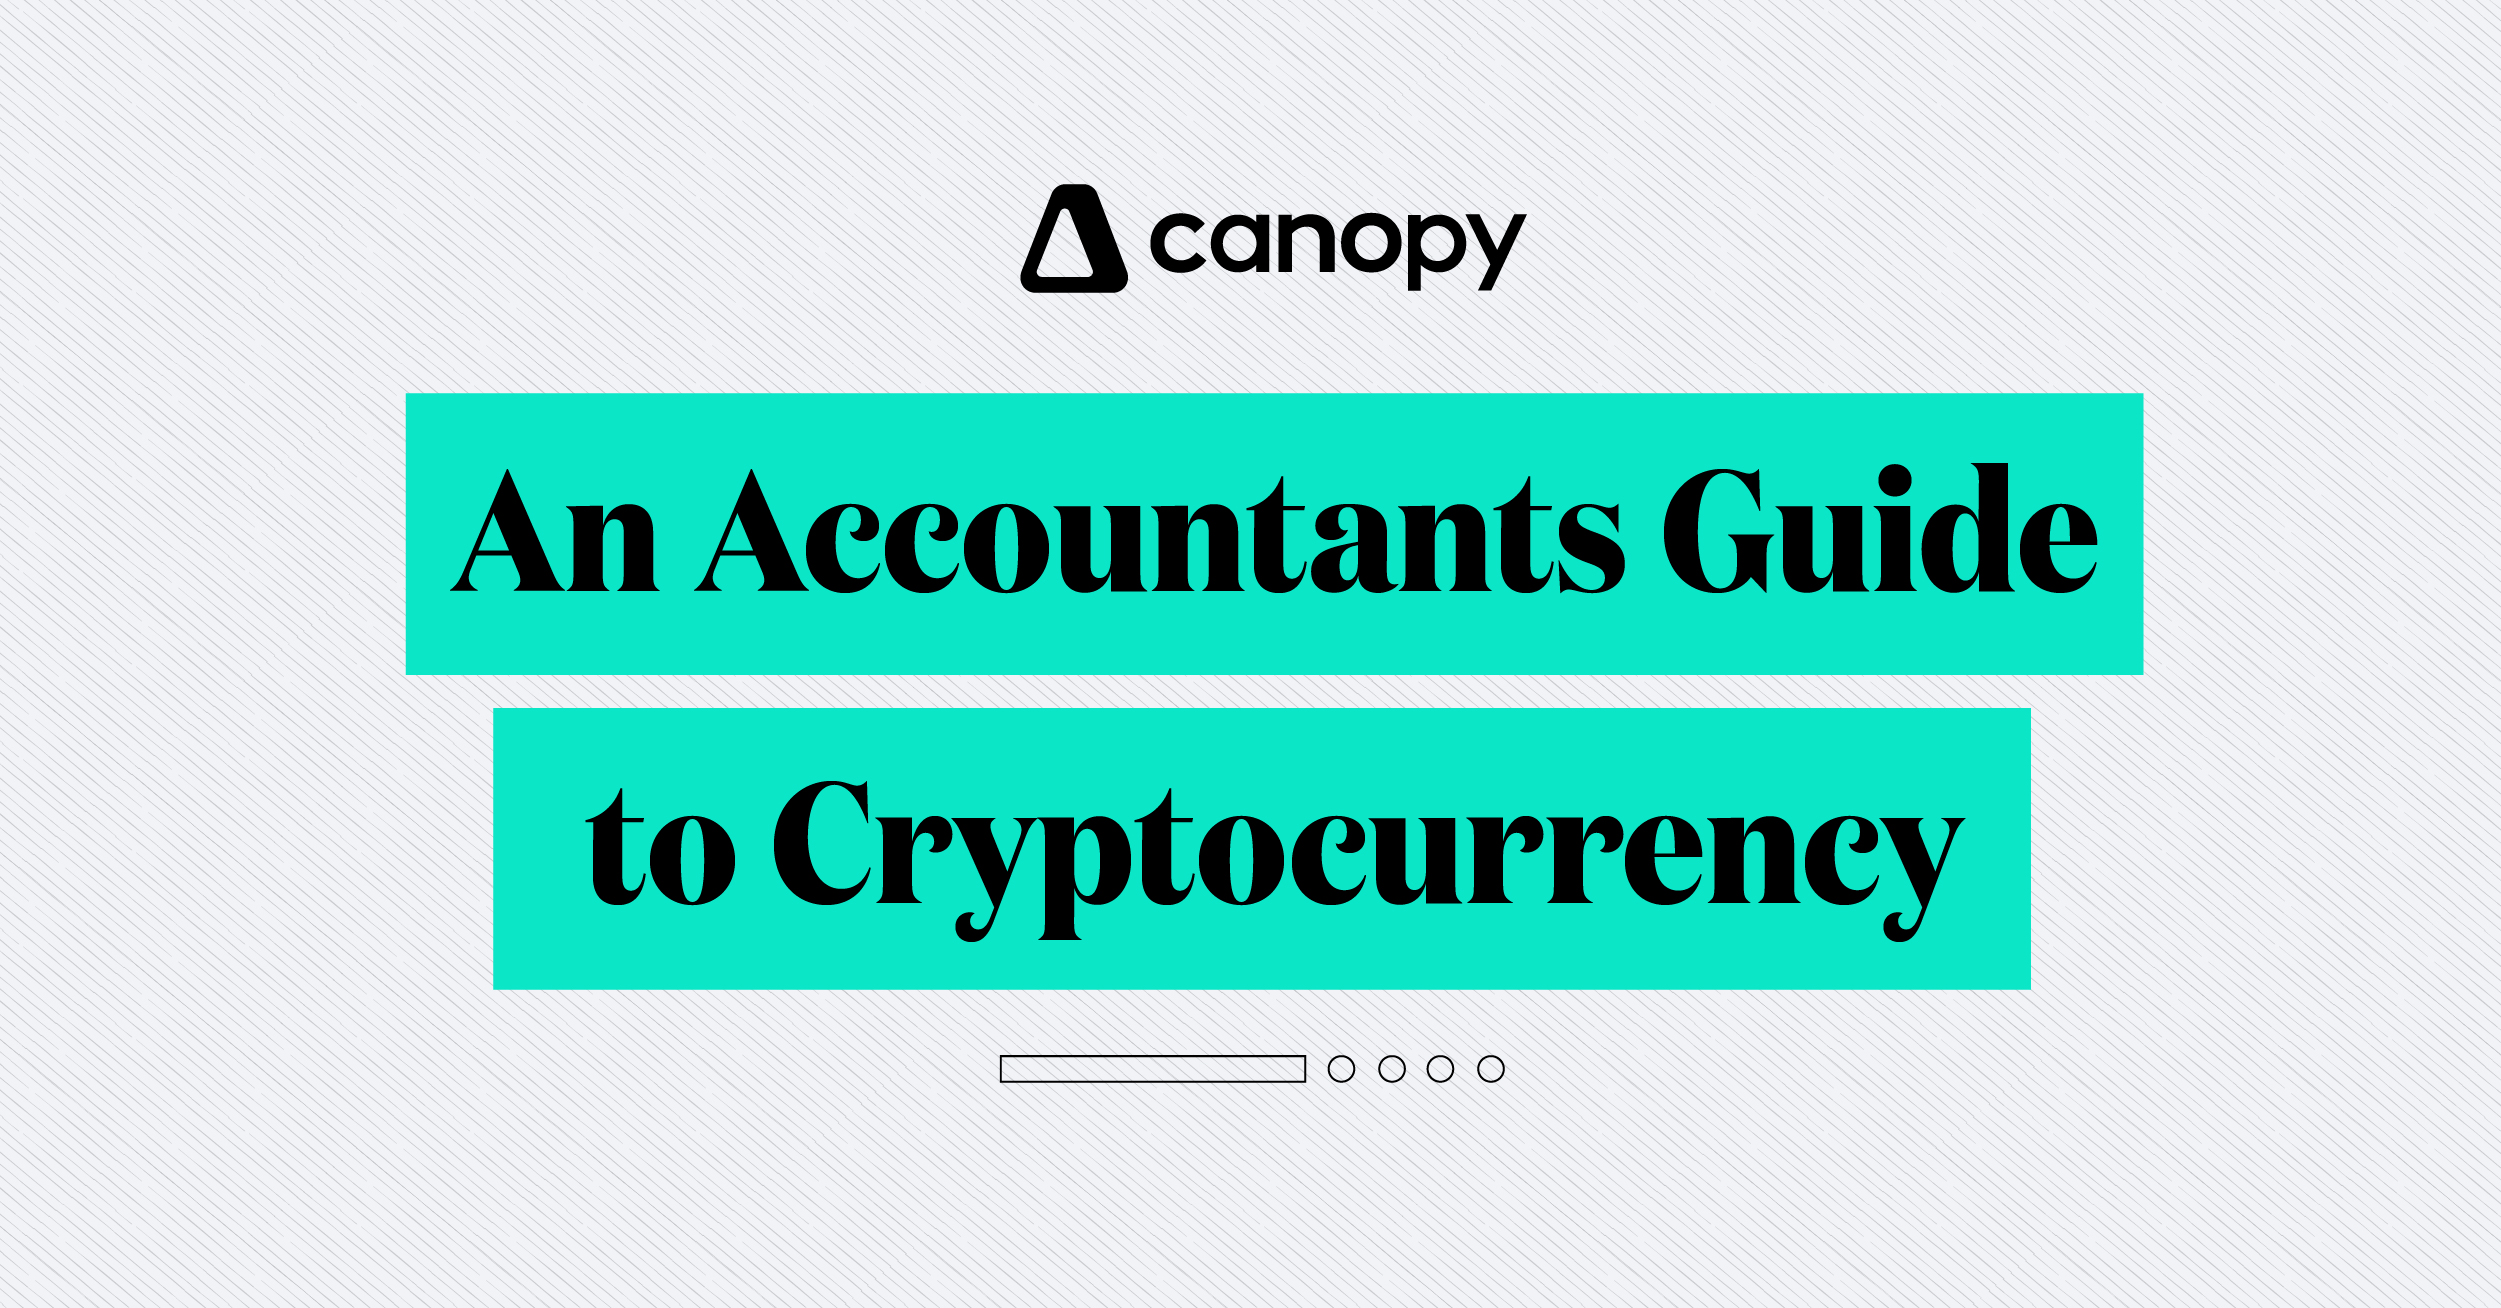 An Accountant's Guide to Cryptocurrency